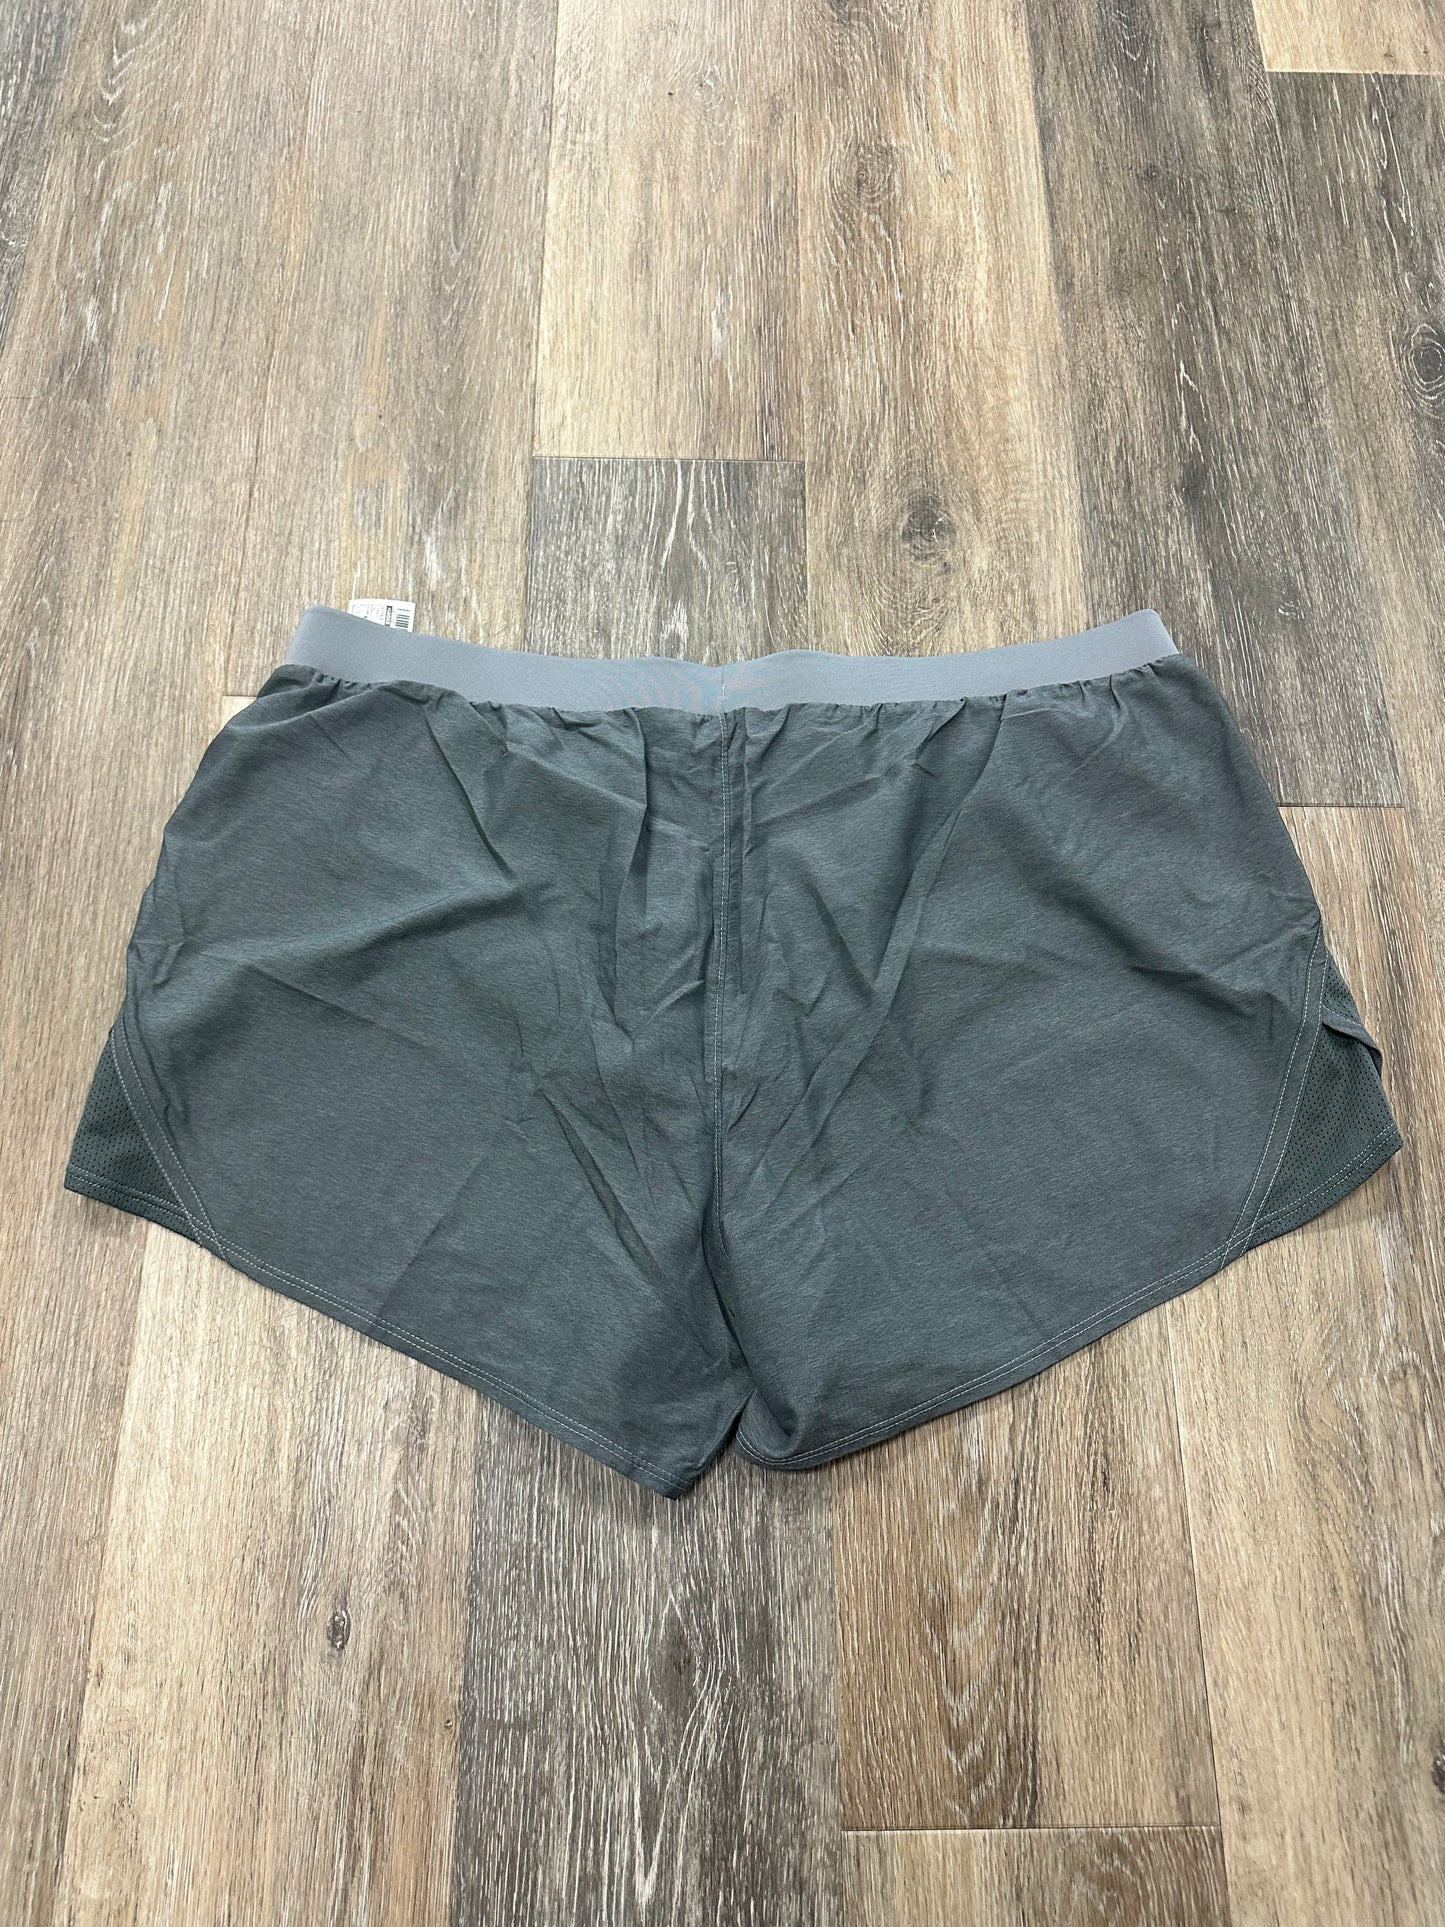 Athletic Shorts By Under Armour  Size: Xl